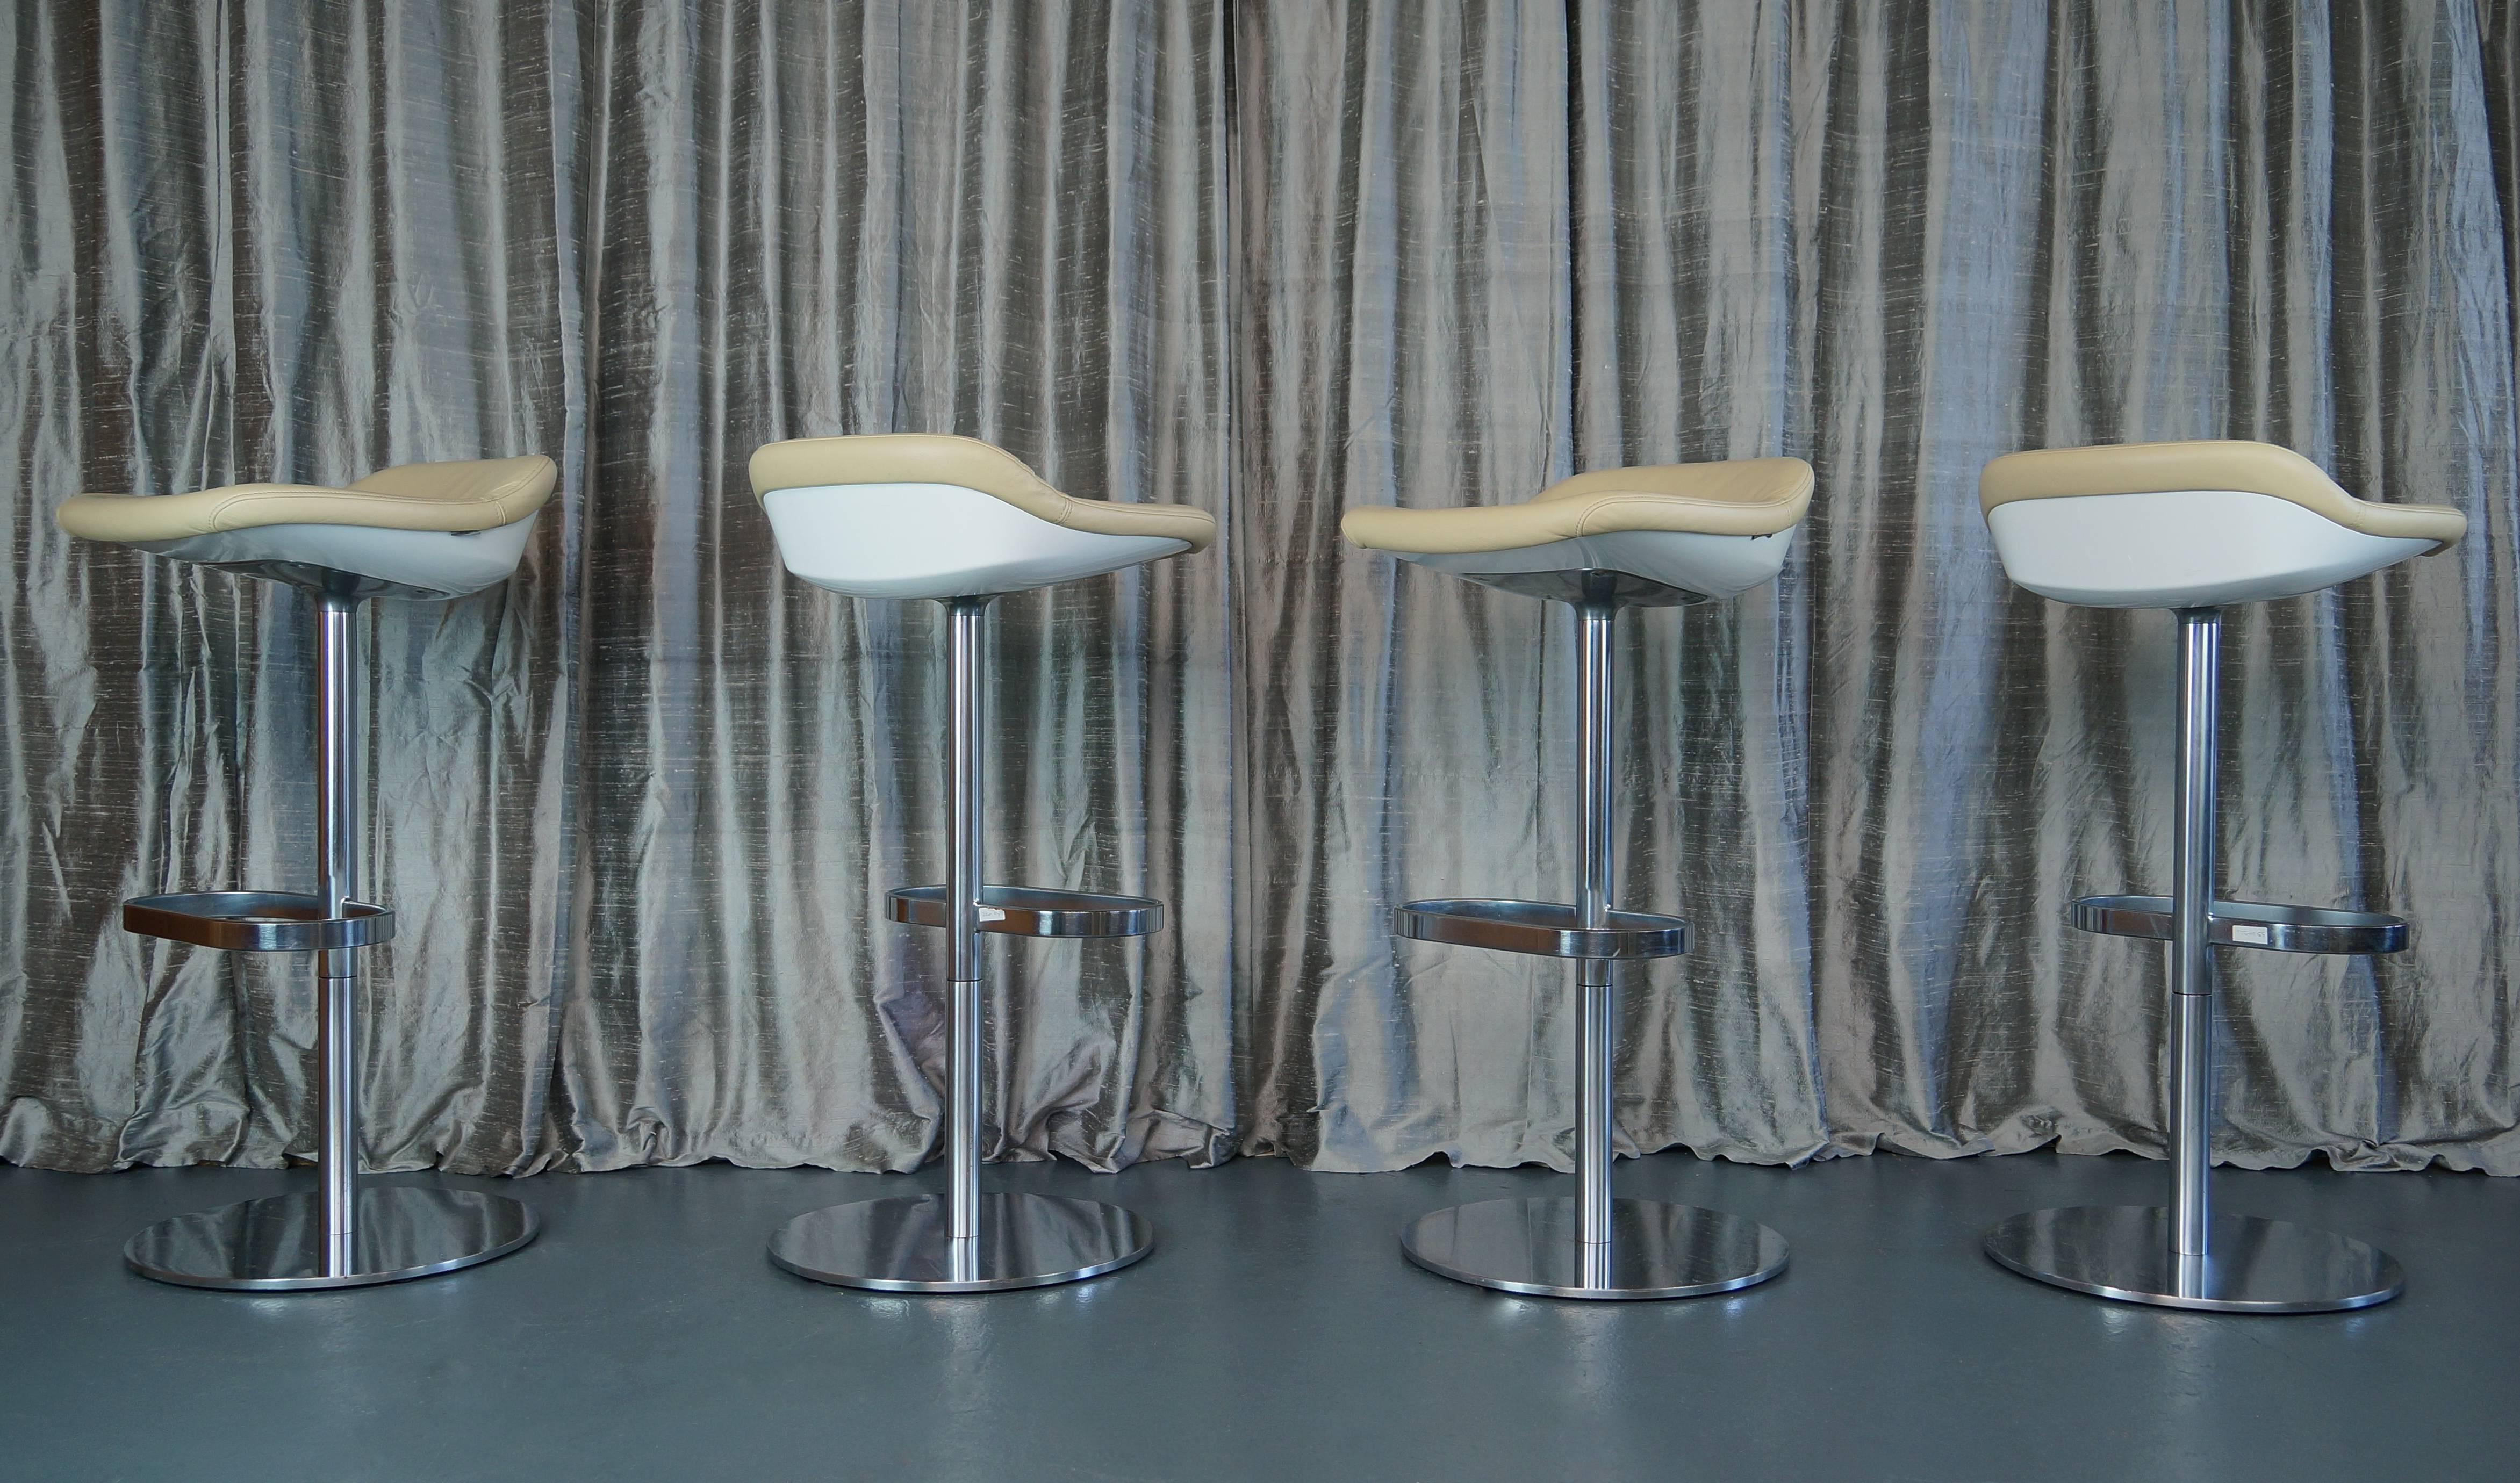 Walter Knoll ‘Turtle’ bar stools by Pearson Lloyd - Set of four

Design year: 2005
Designer: Luke Pearson, Tom Lloyd renowned London design team
Maker: Walter Knoll

These sleek, compact bar stools have a hard outer shell (Turtle ) that gives